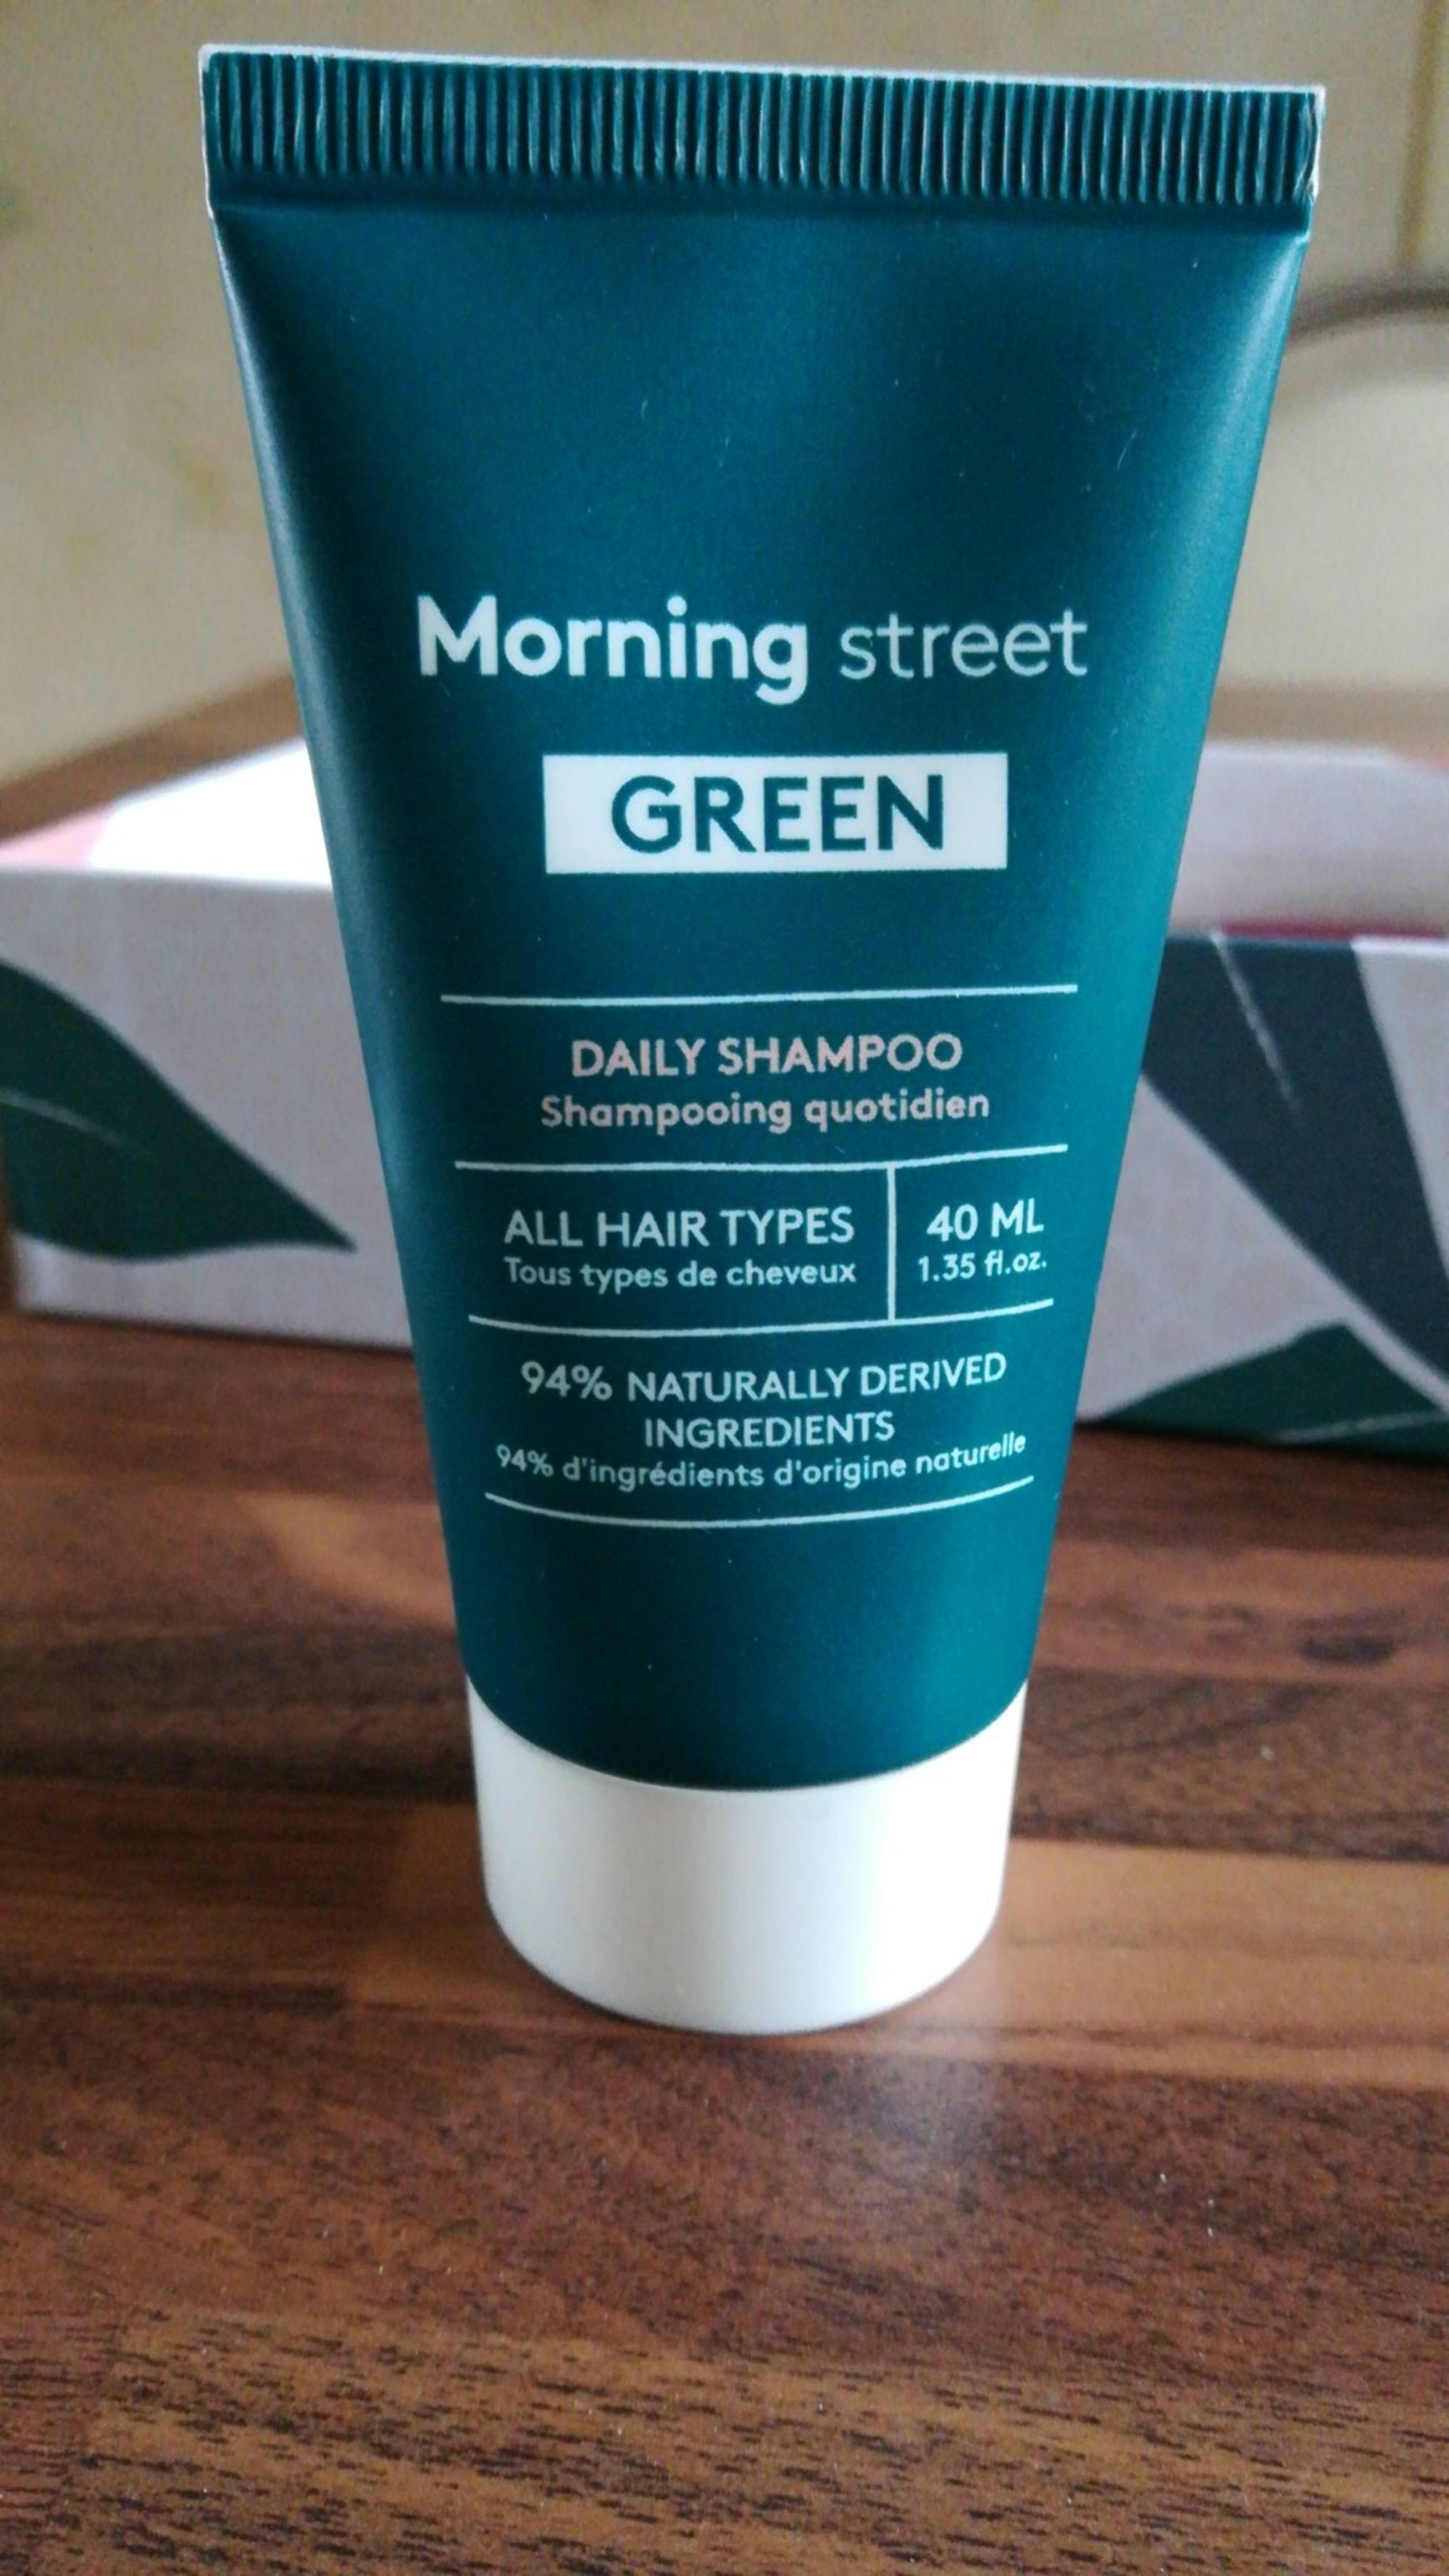 MORNING STREET - Green - Shampooing quotidien